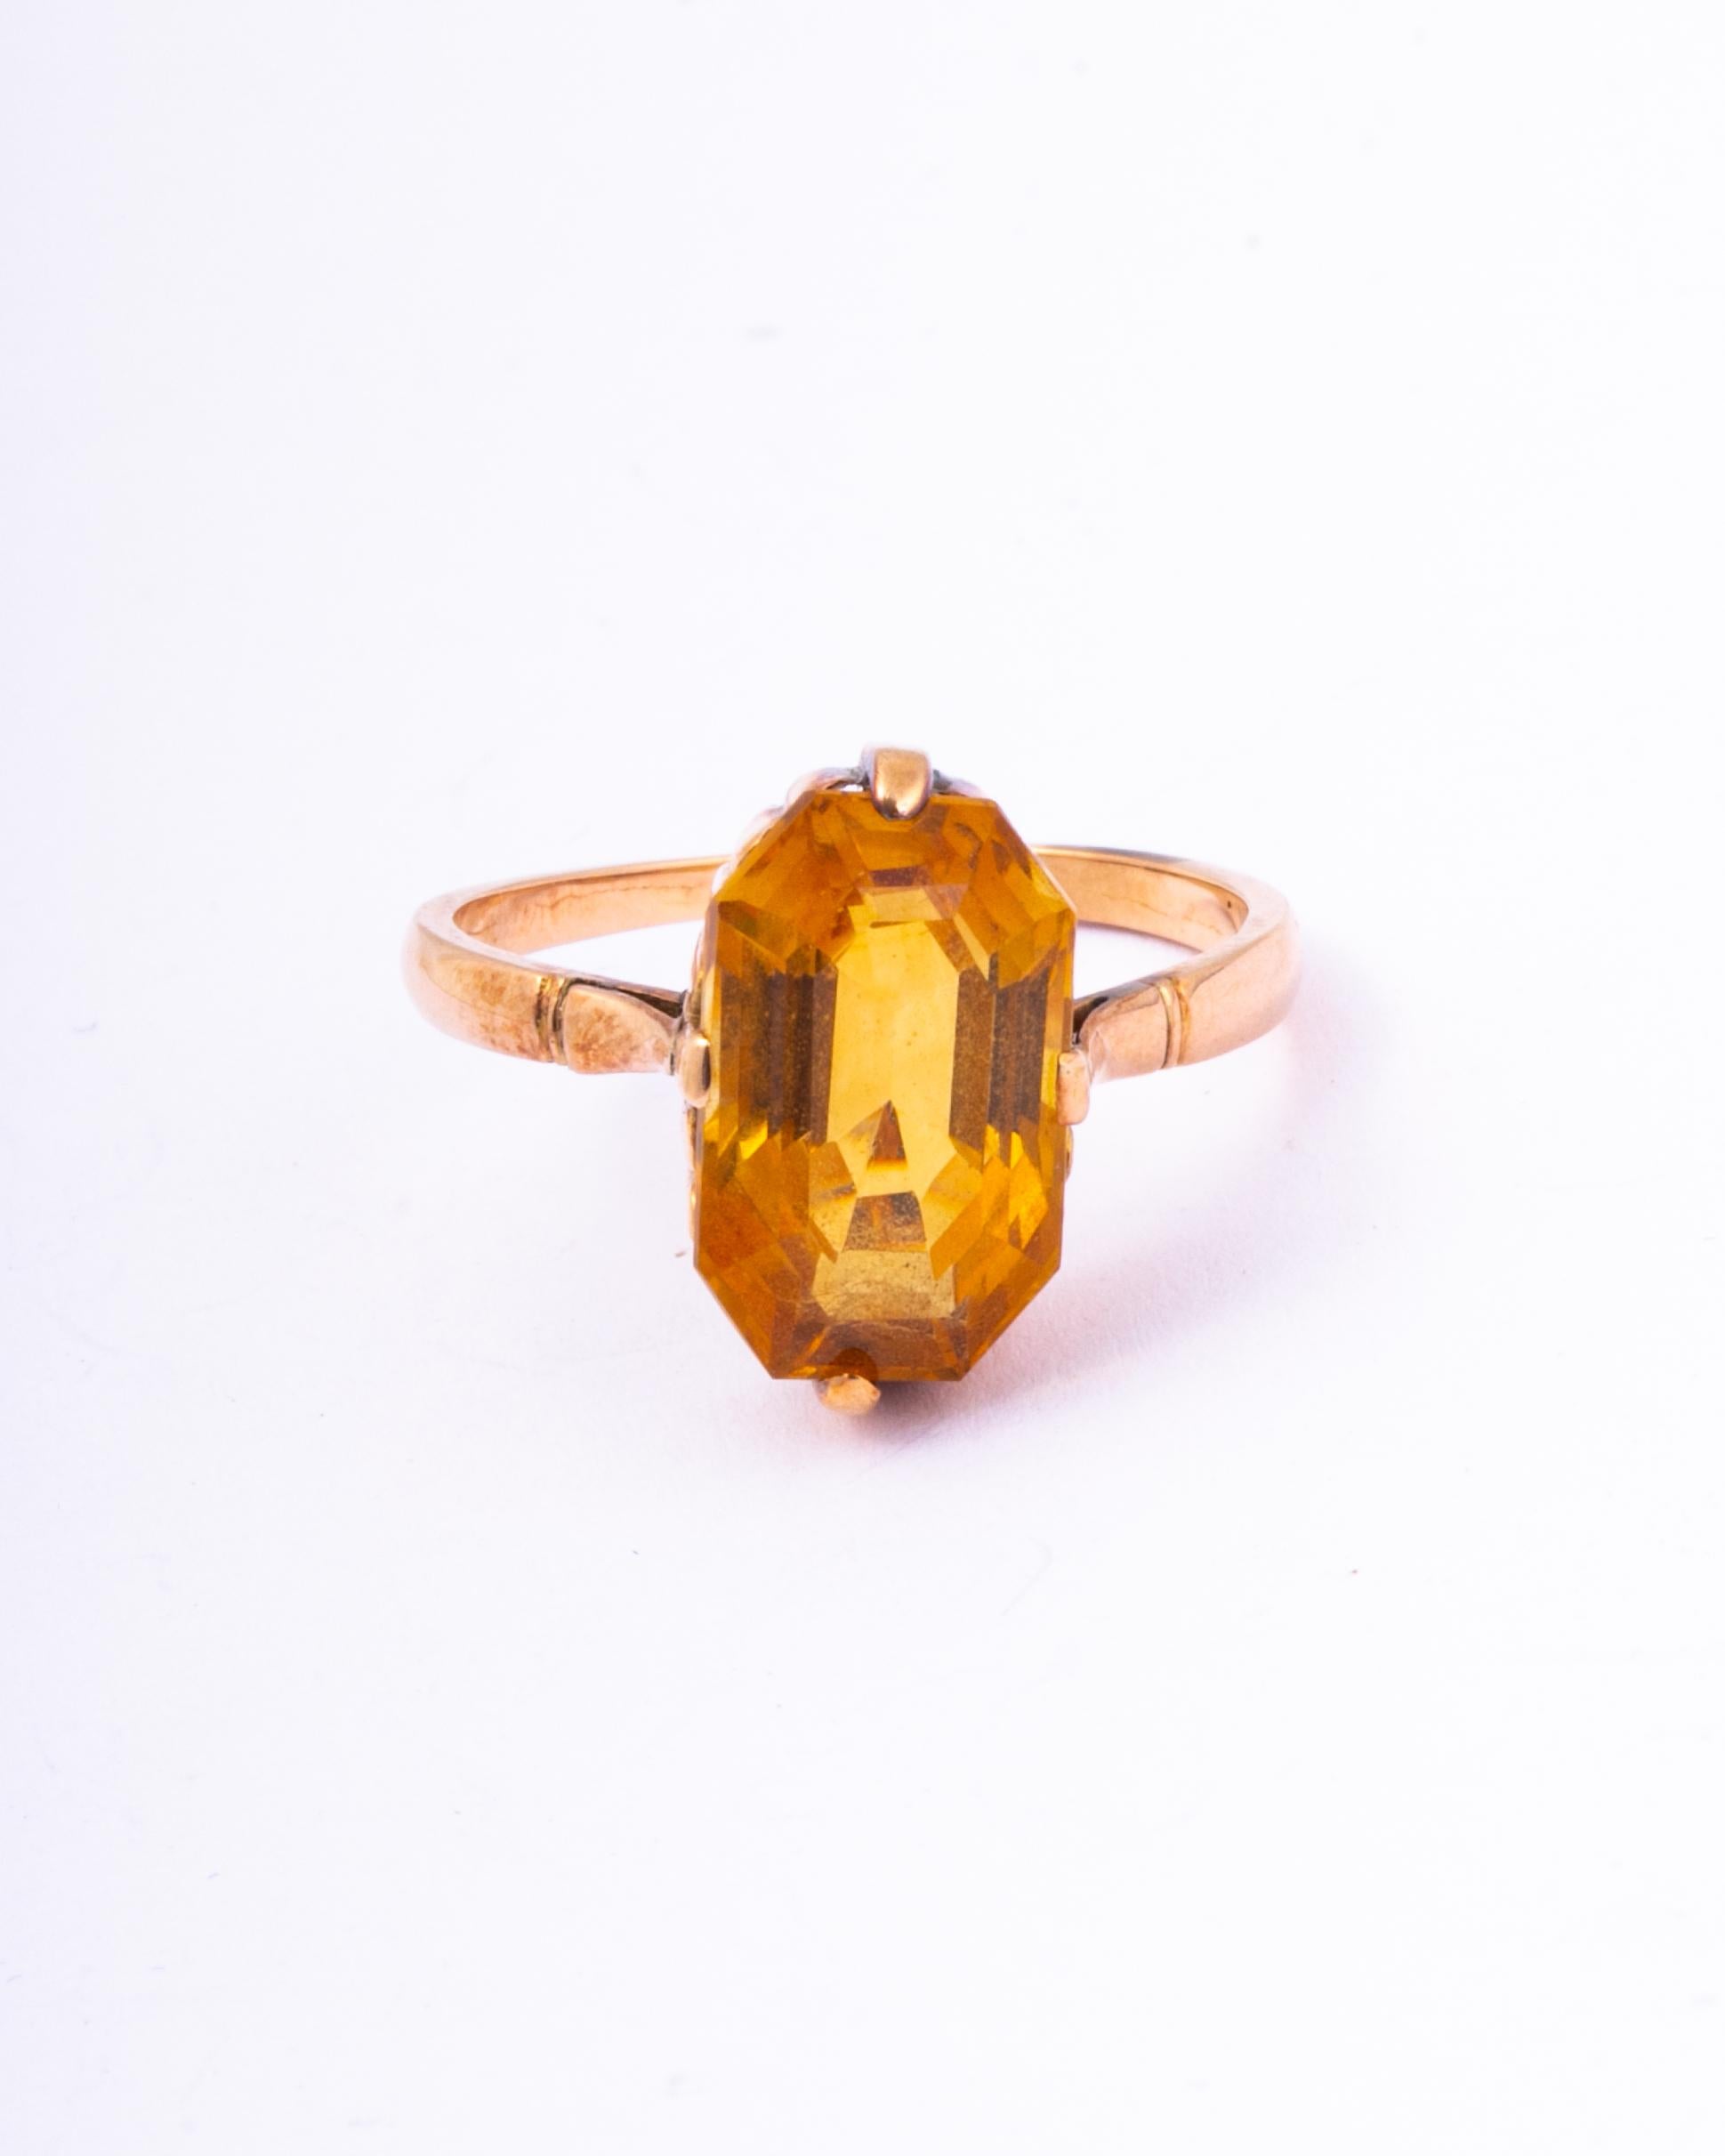 Striking oval golden topaz set in a classic art deco 9ct gold setting and band.

Ring Size: P 1/2 or 8
Stone Dimensions: 14x8mm
Height Off Finger: 6.5mm

Weight: 3.6g